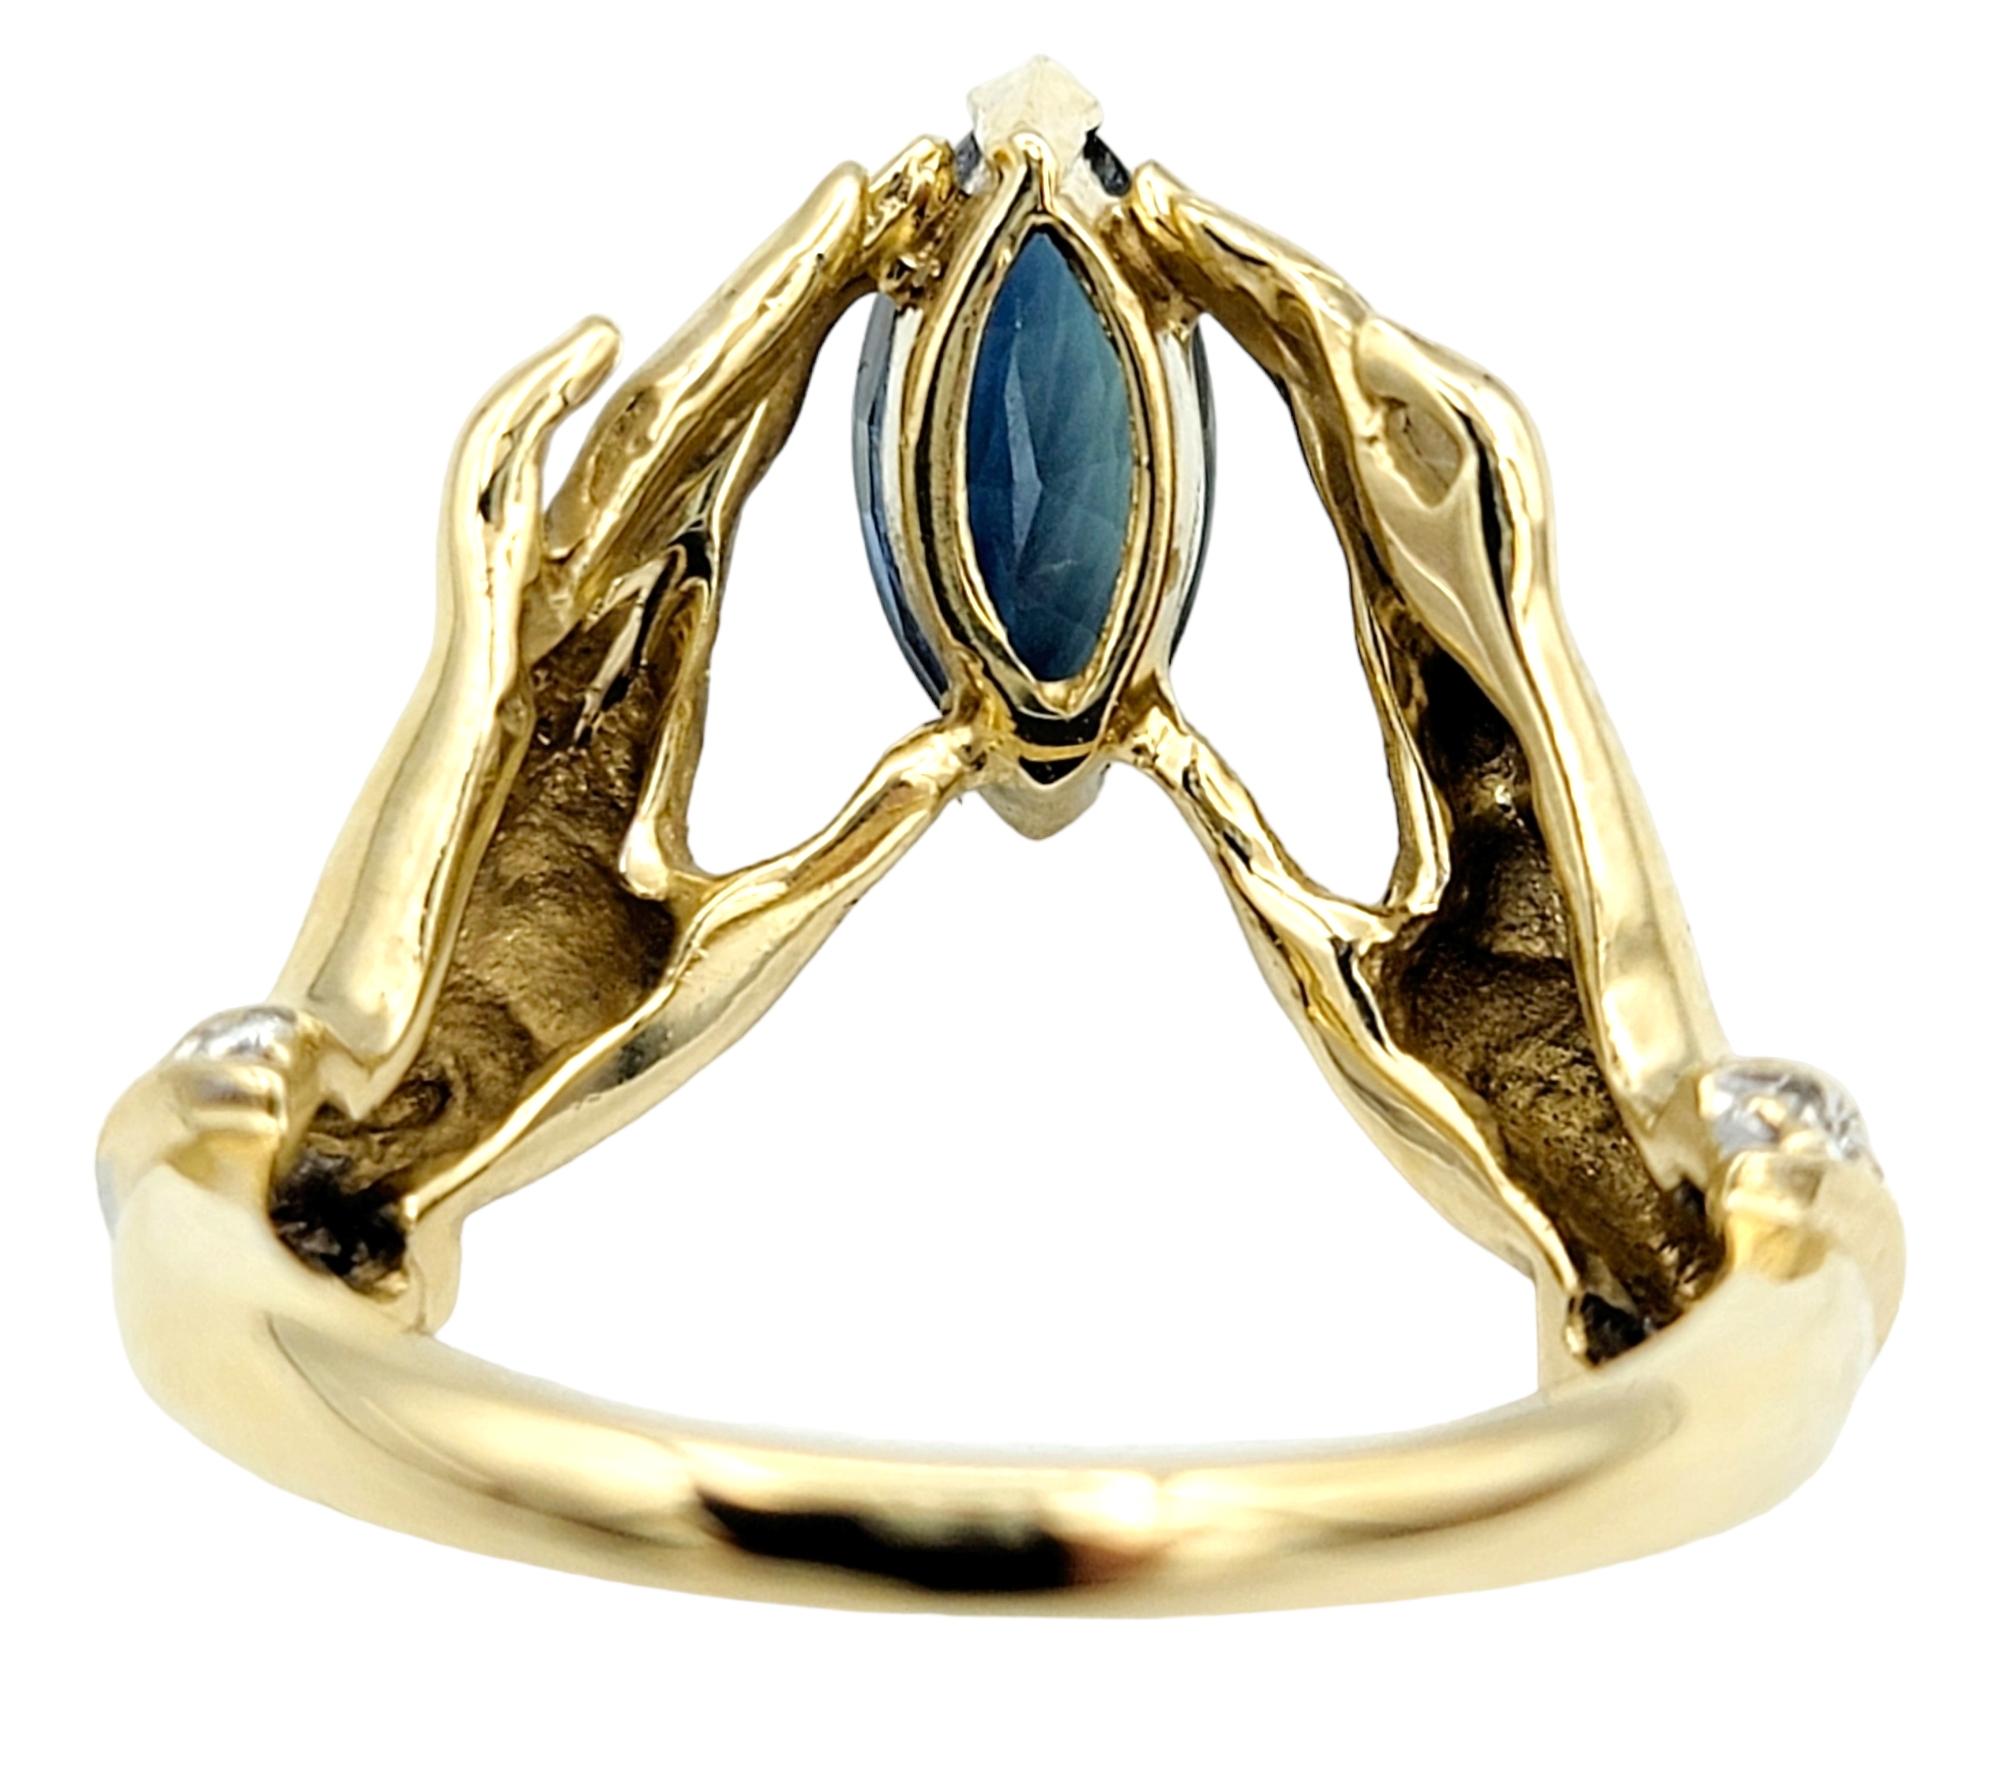 Unique Bejeweled Graceful Hands Holding Marquis Sapphire 14K Yellow Gold Ring In Good Condition For Sale In Scottsdale, AZ